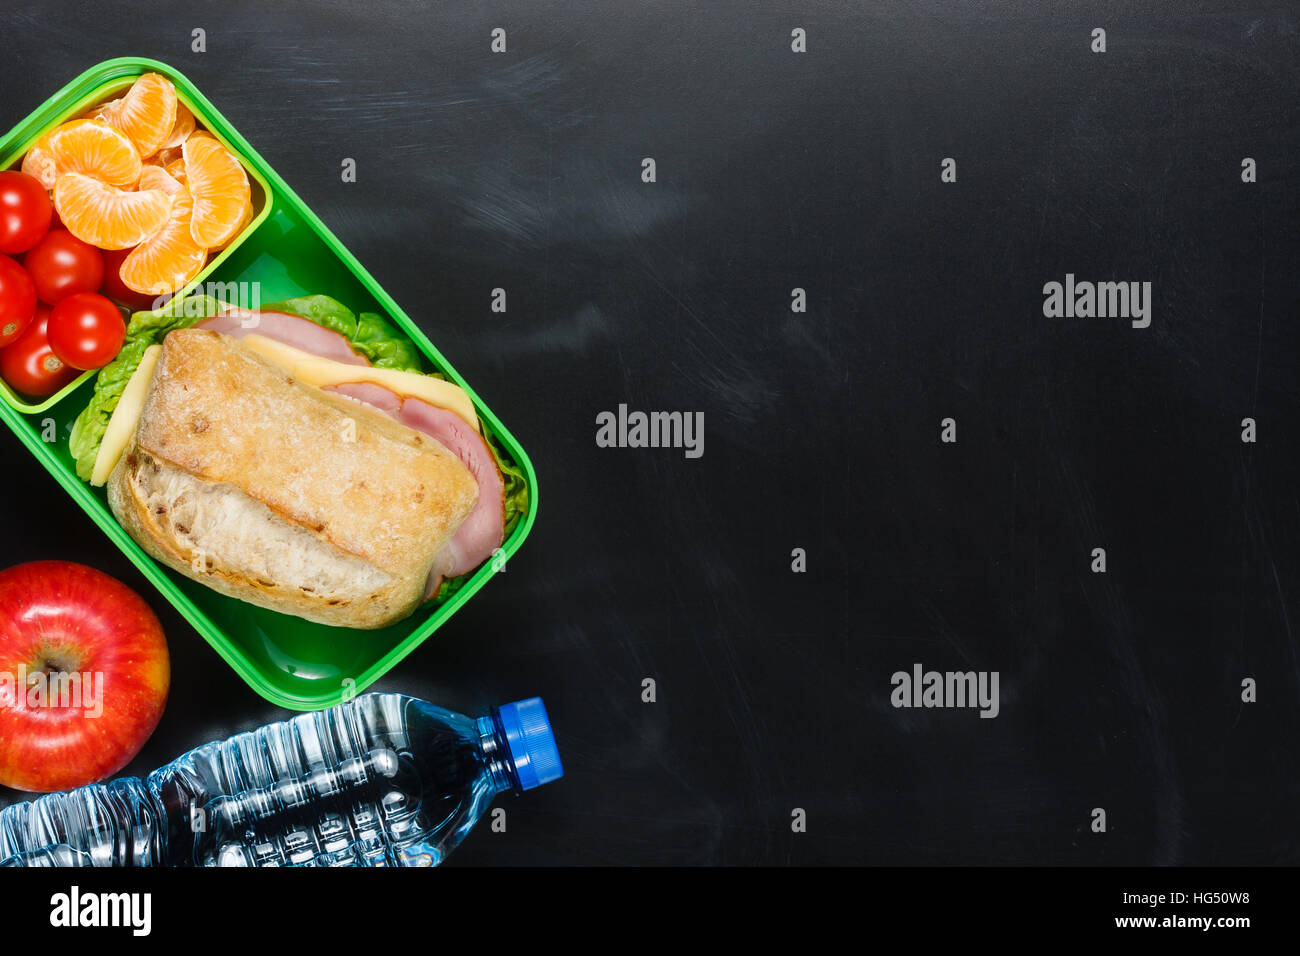 Sandwich, small tomatoes, tangerine, apple in plastic lunch box and bottle of water on black chalkboard. Stock Photo